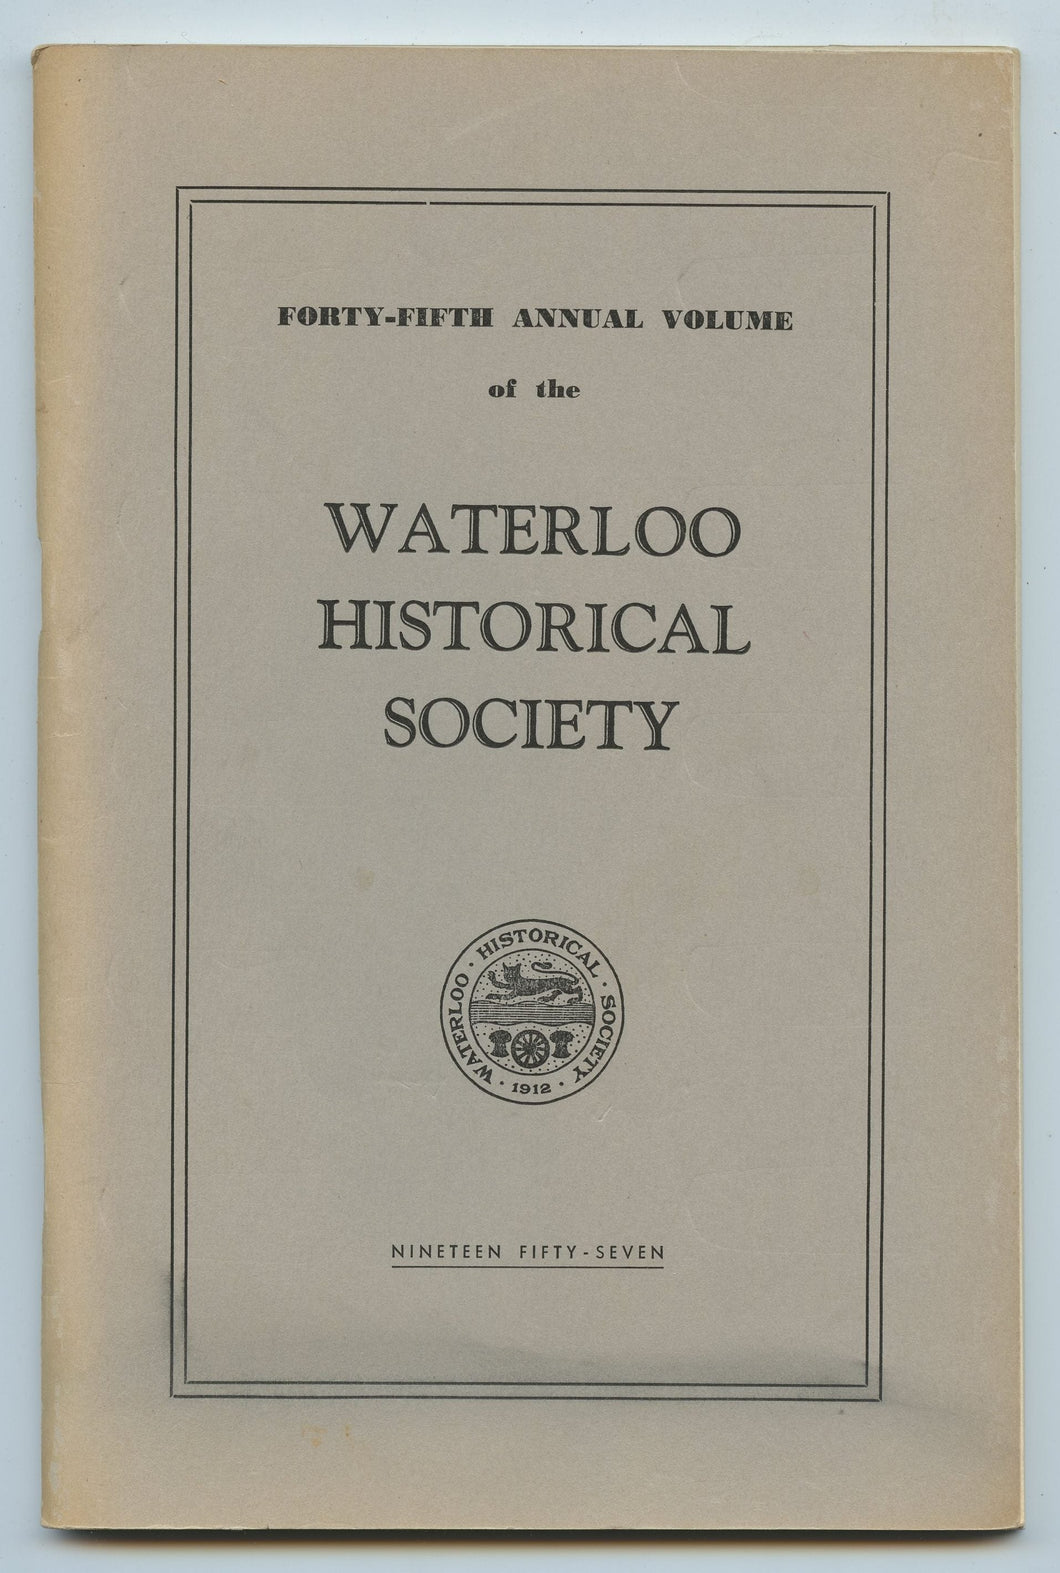 Forty-fifth Annual Volume of the Waterloo Historical Society 1957